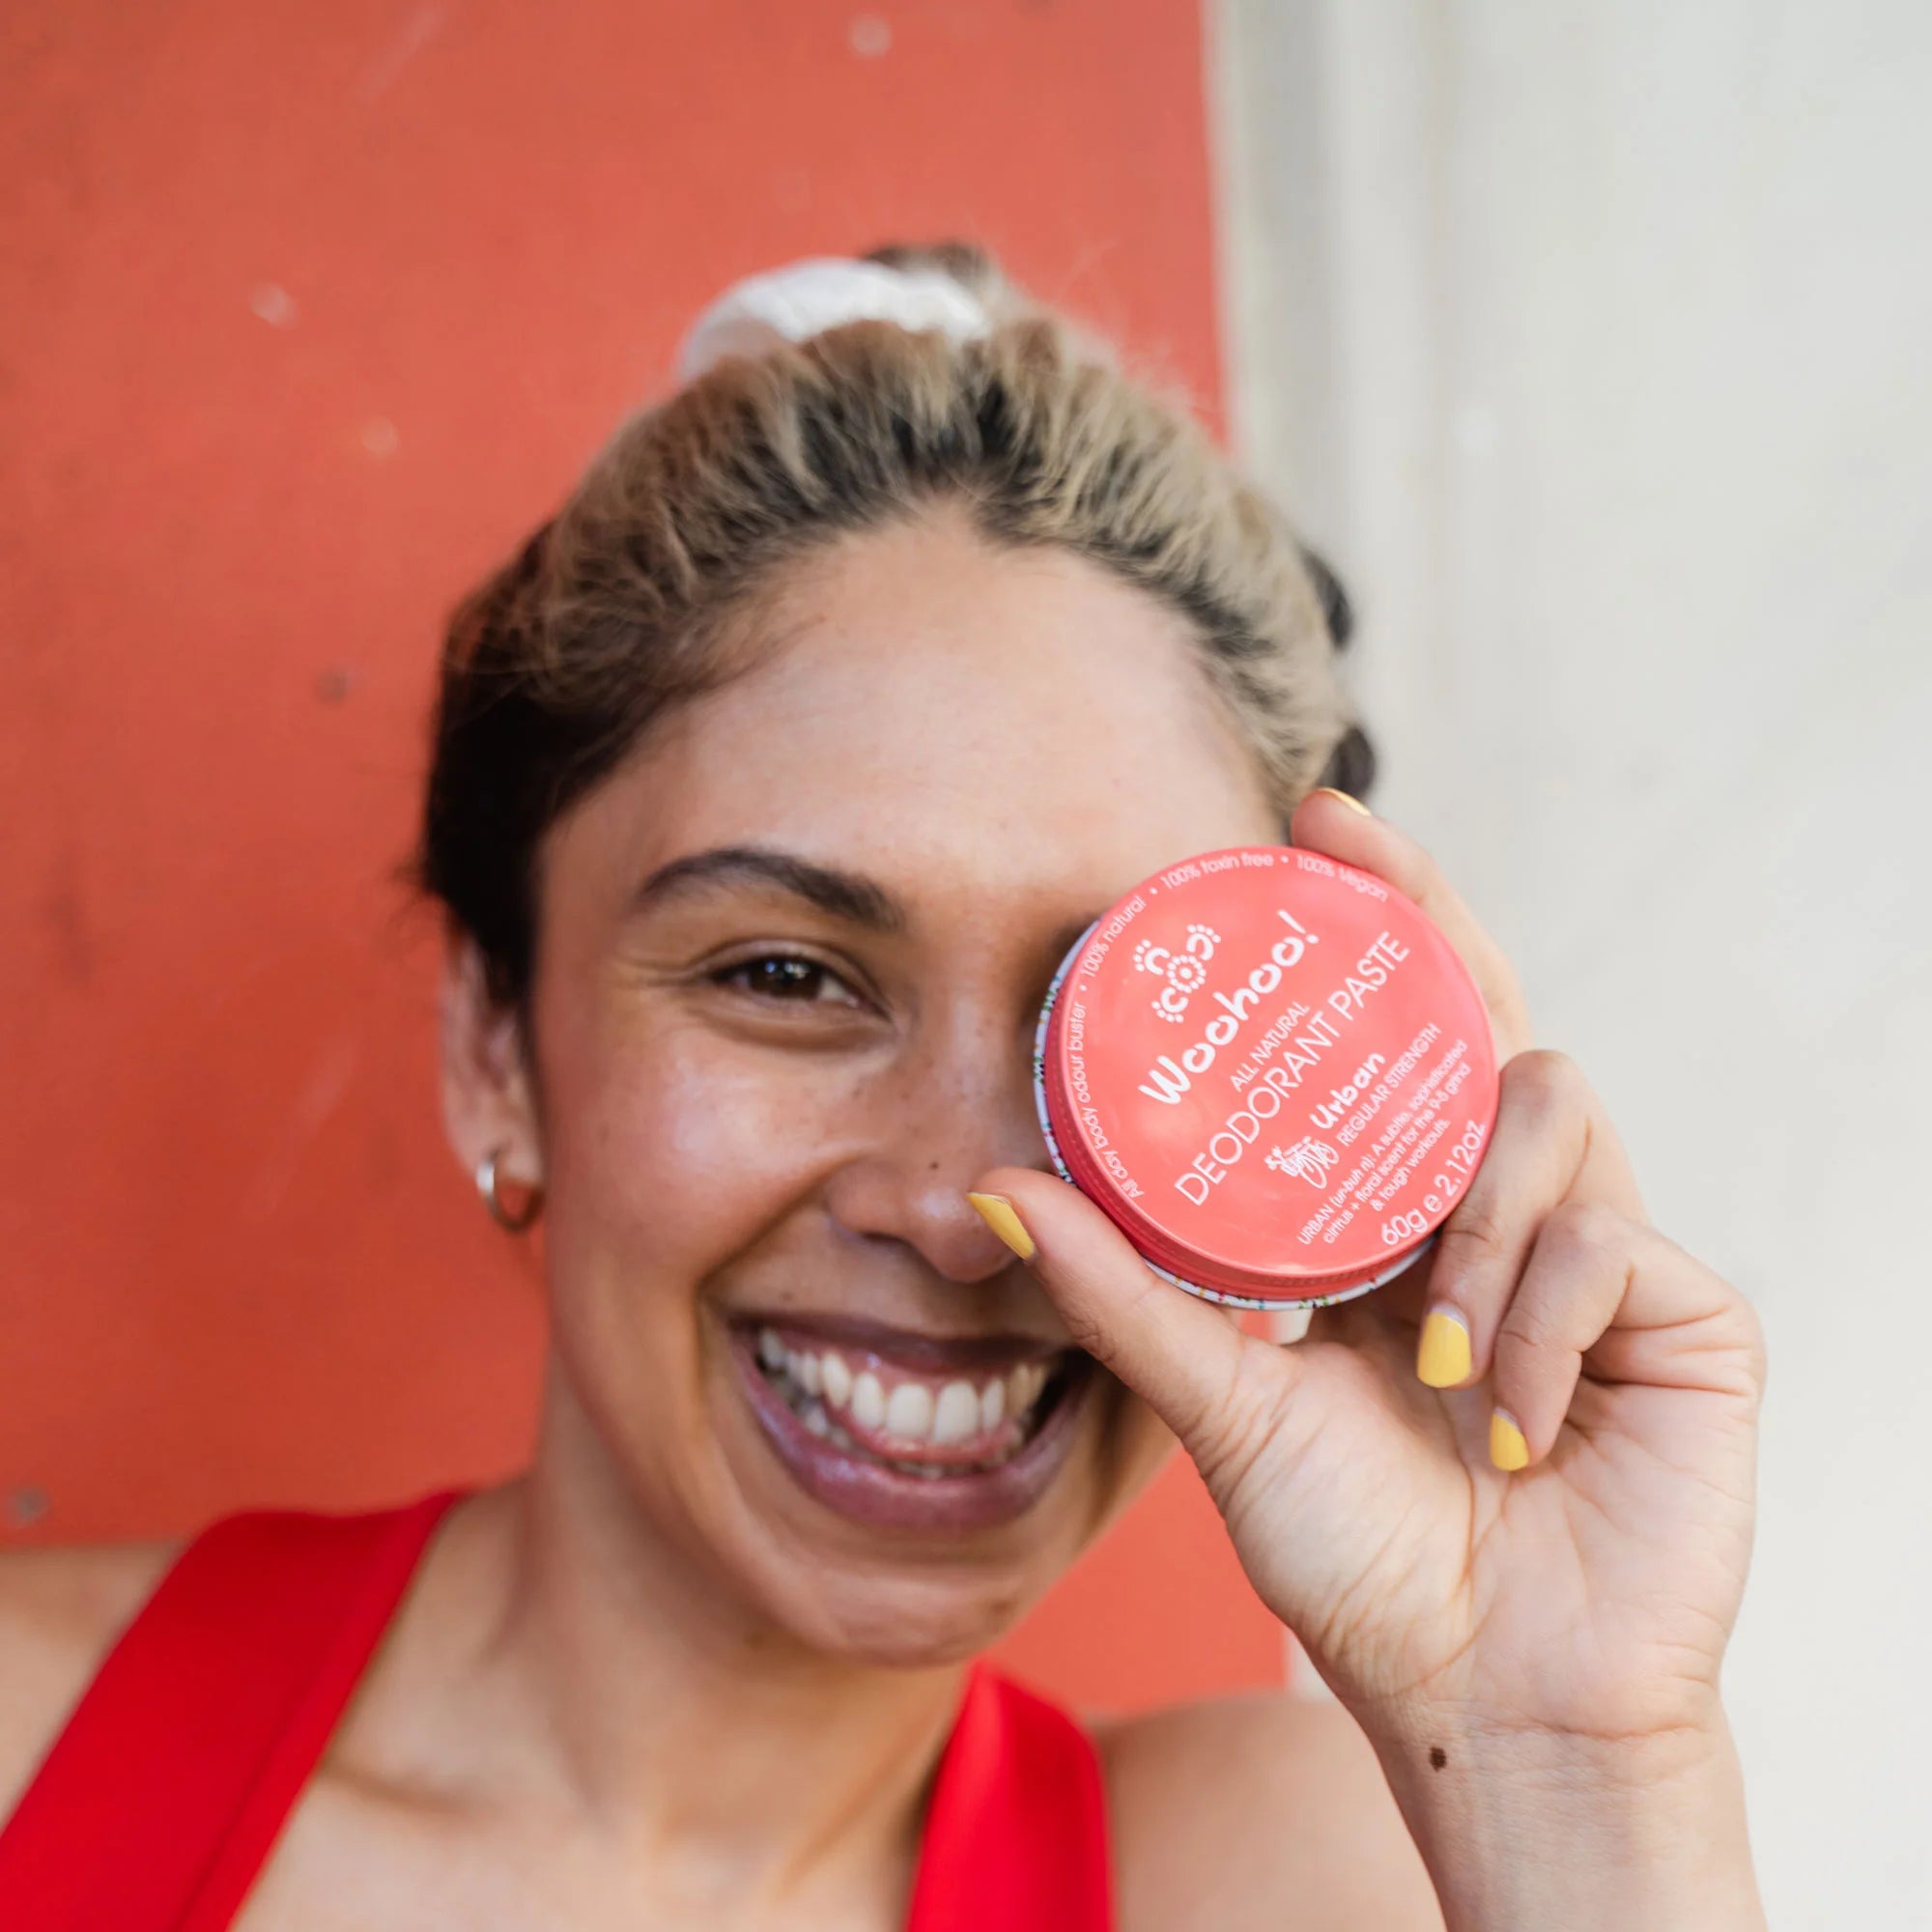 Image of a woman in a red sleeveless shirt holding an Urban Natural Deodorant Paste tin up to her eye as she is smiling at the camera